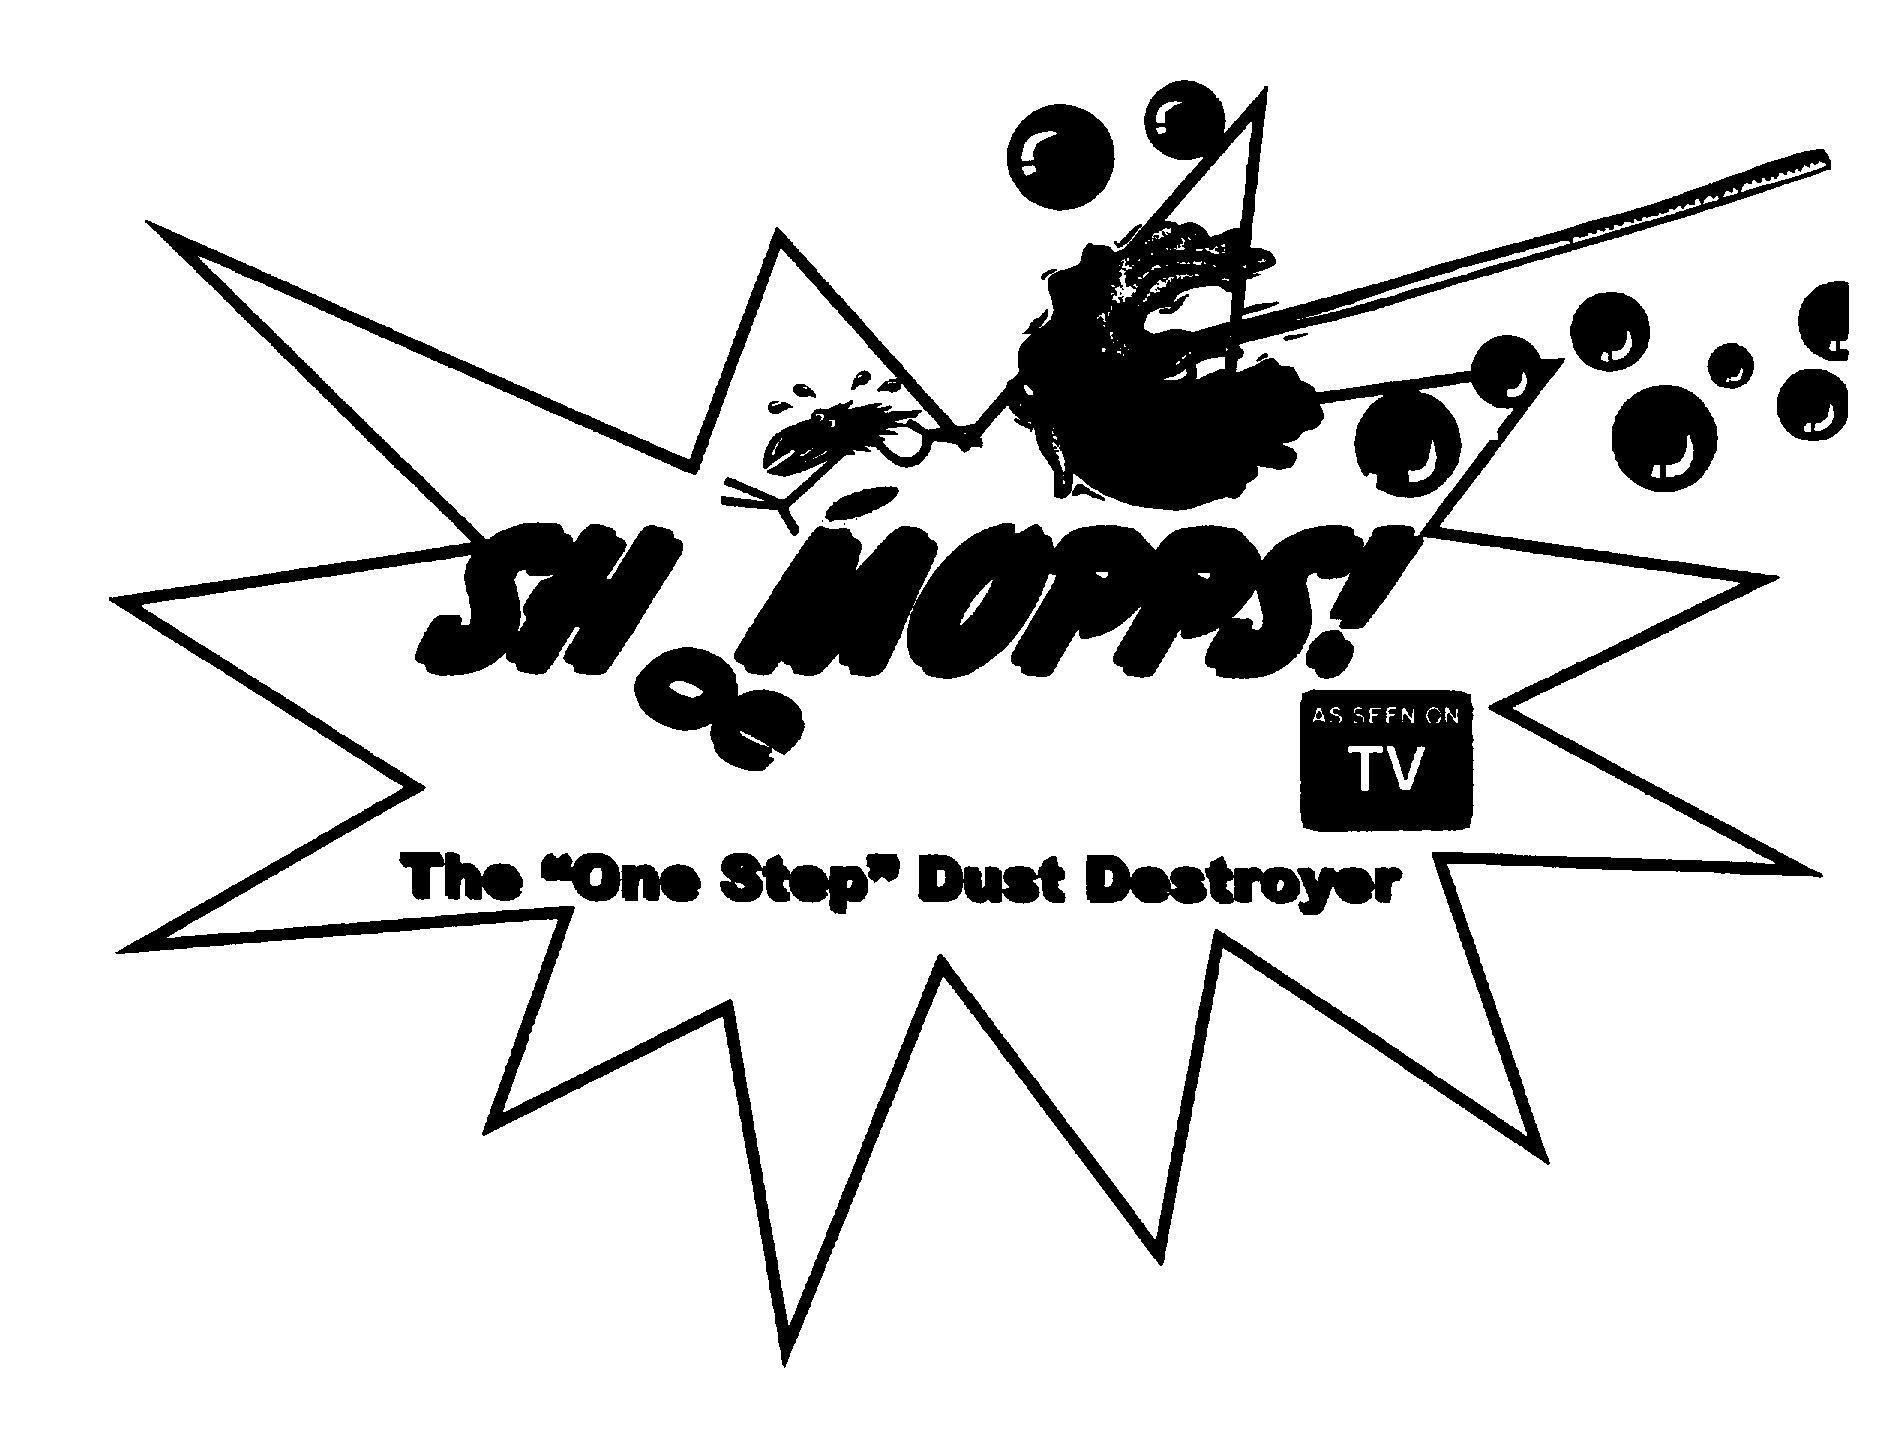  SHOE MOPS! THE "ONE STEP" DUST DESTROYER AS SEEN ON TV